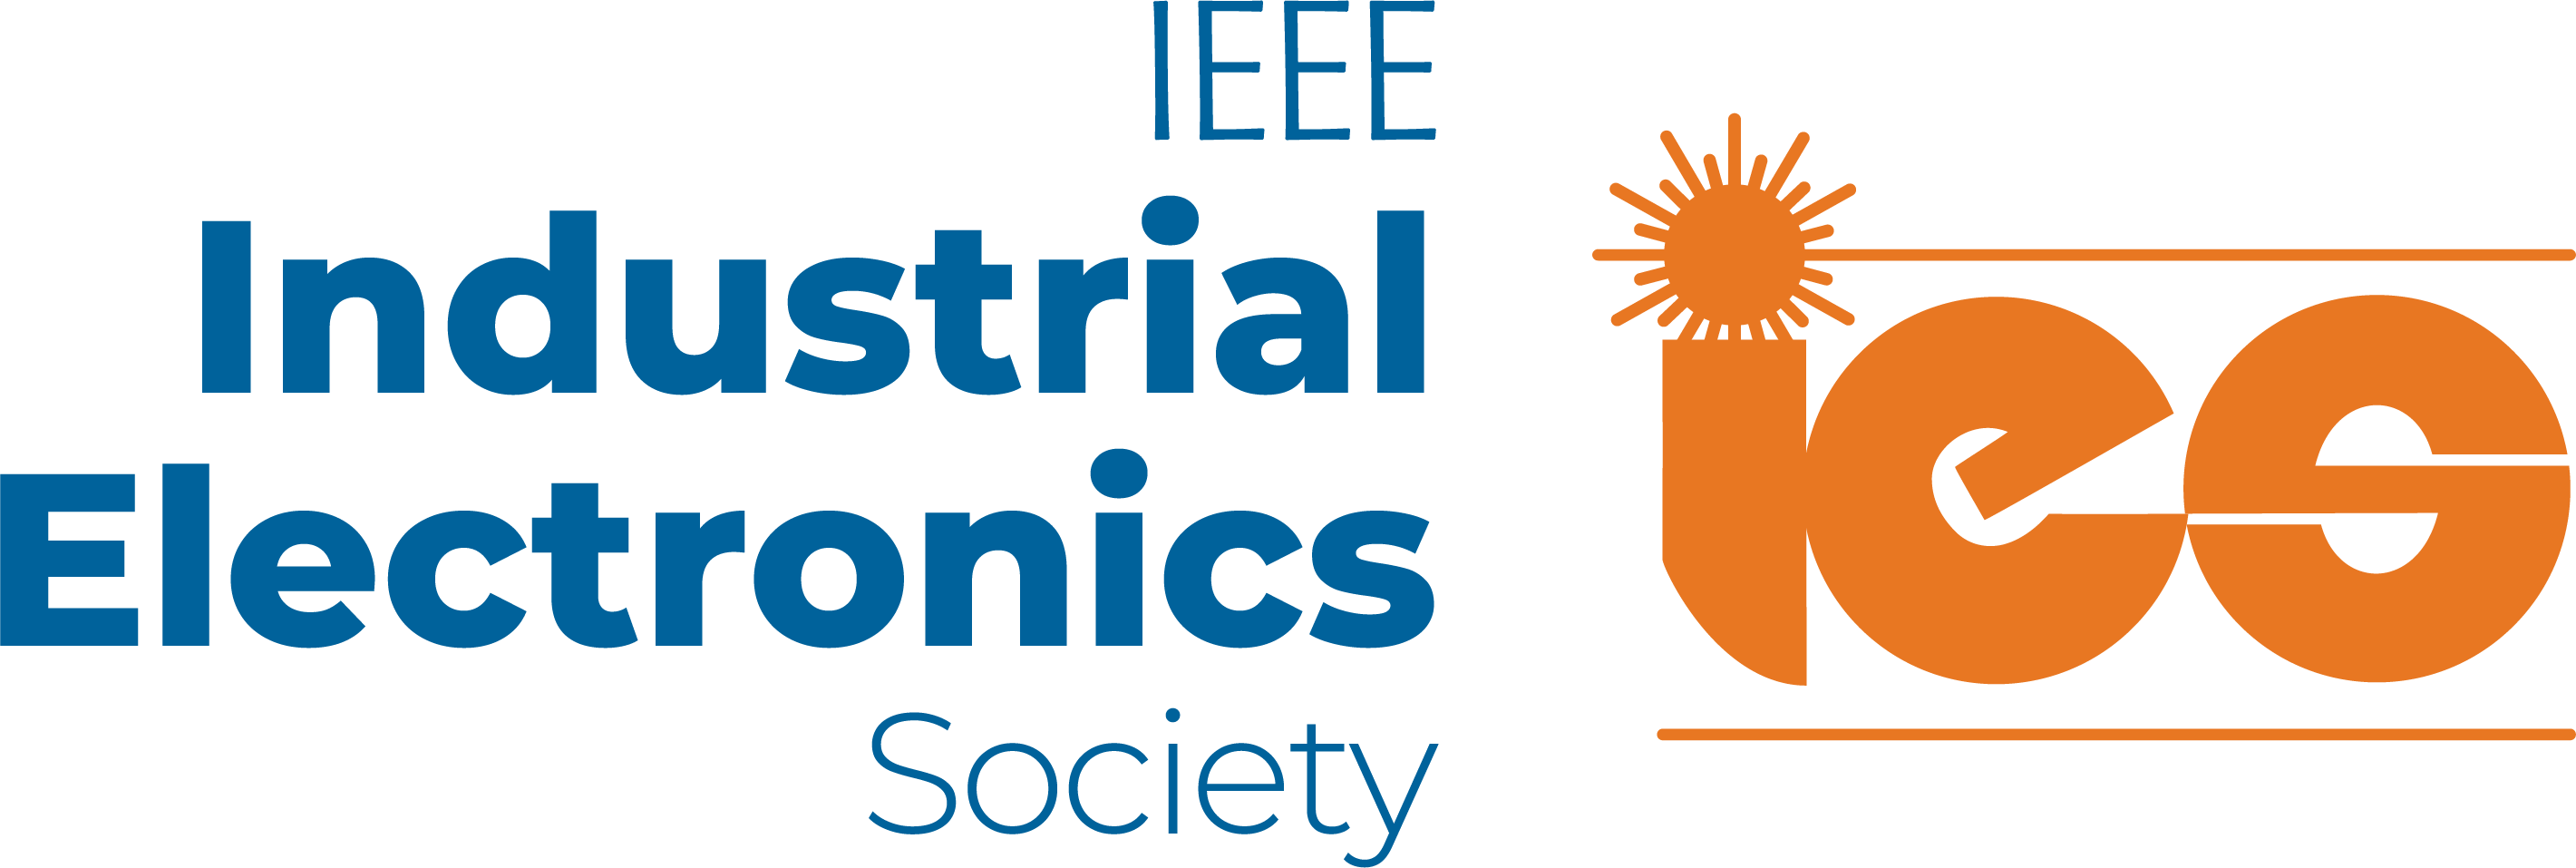 IEEE Industrial Electroics Society